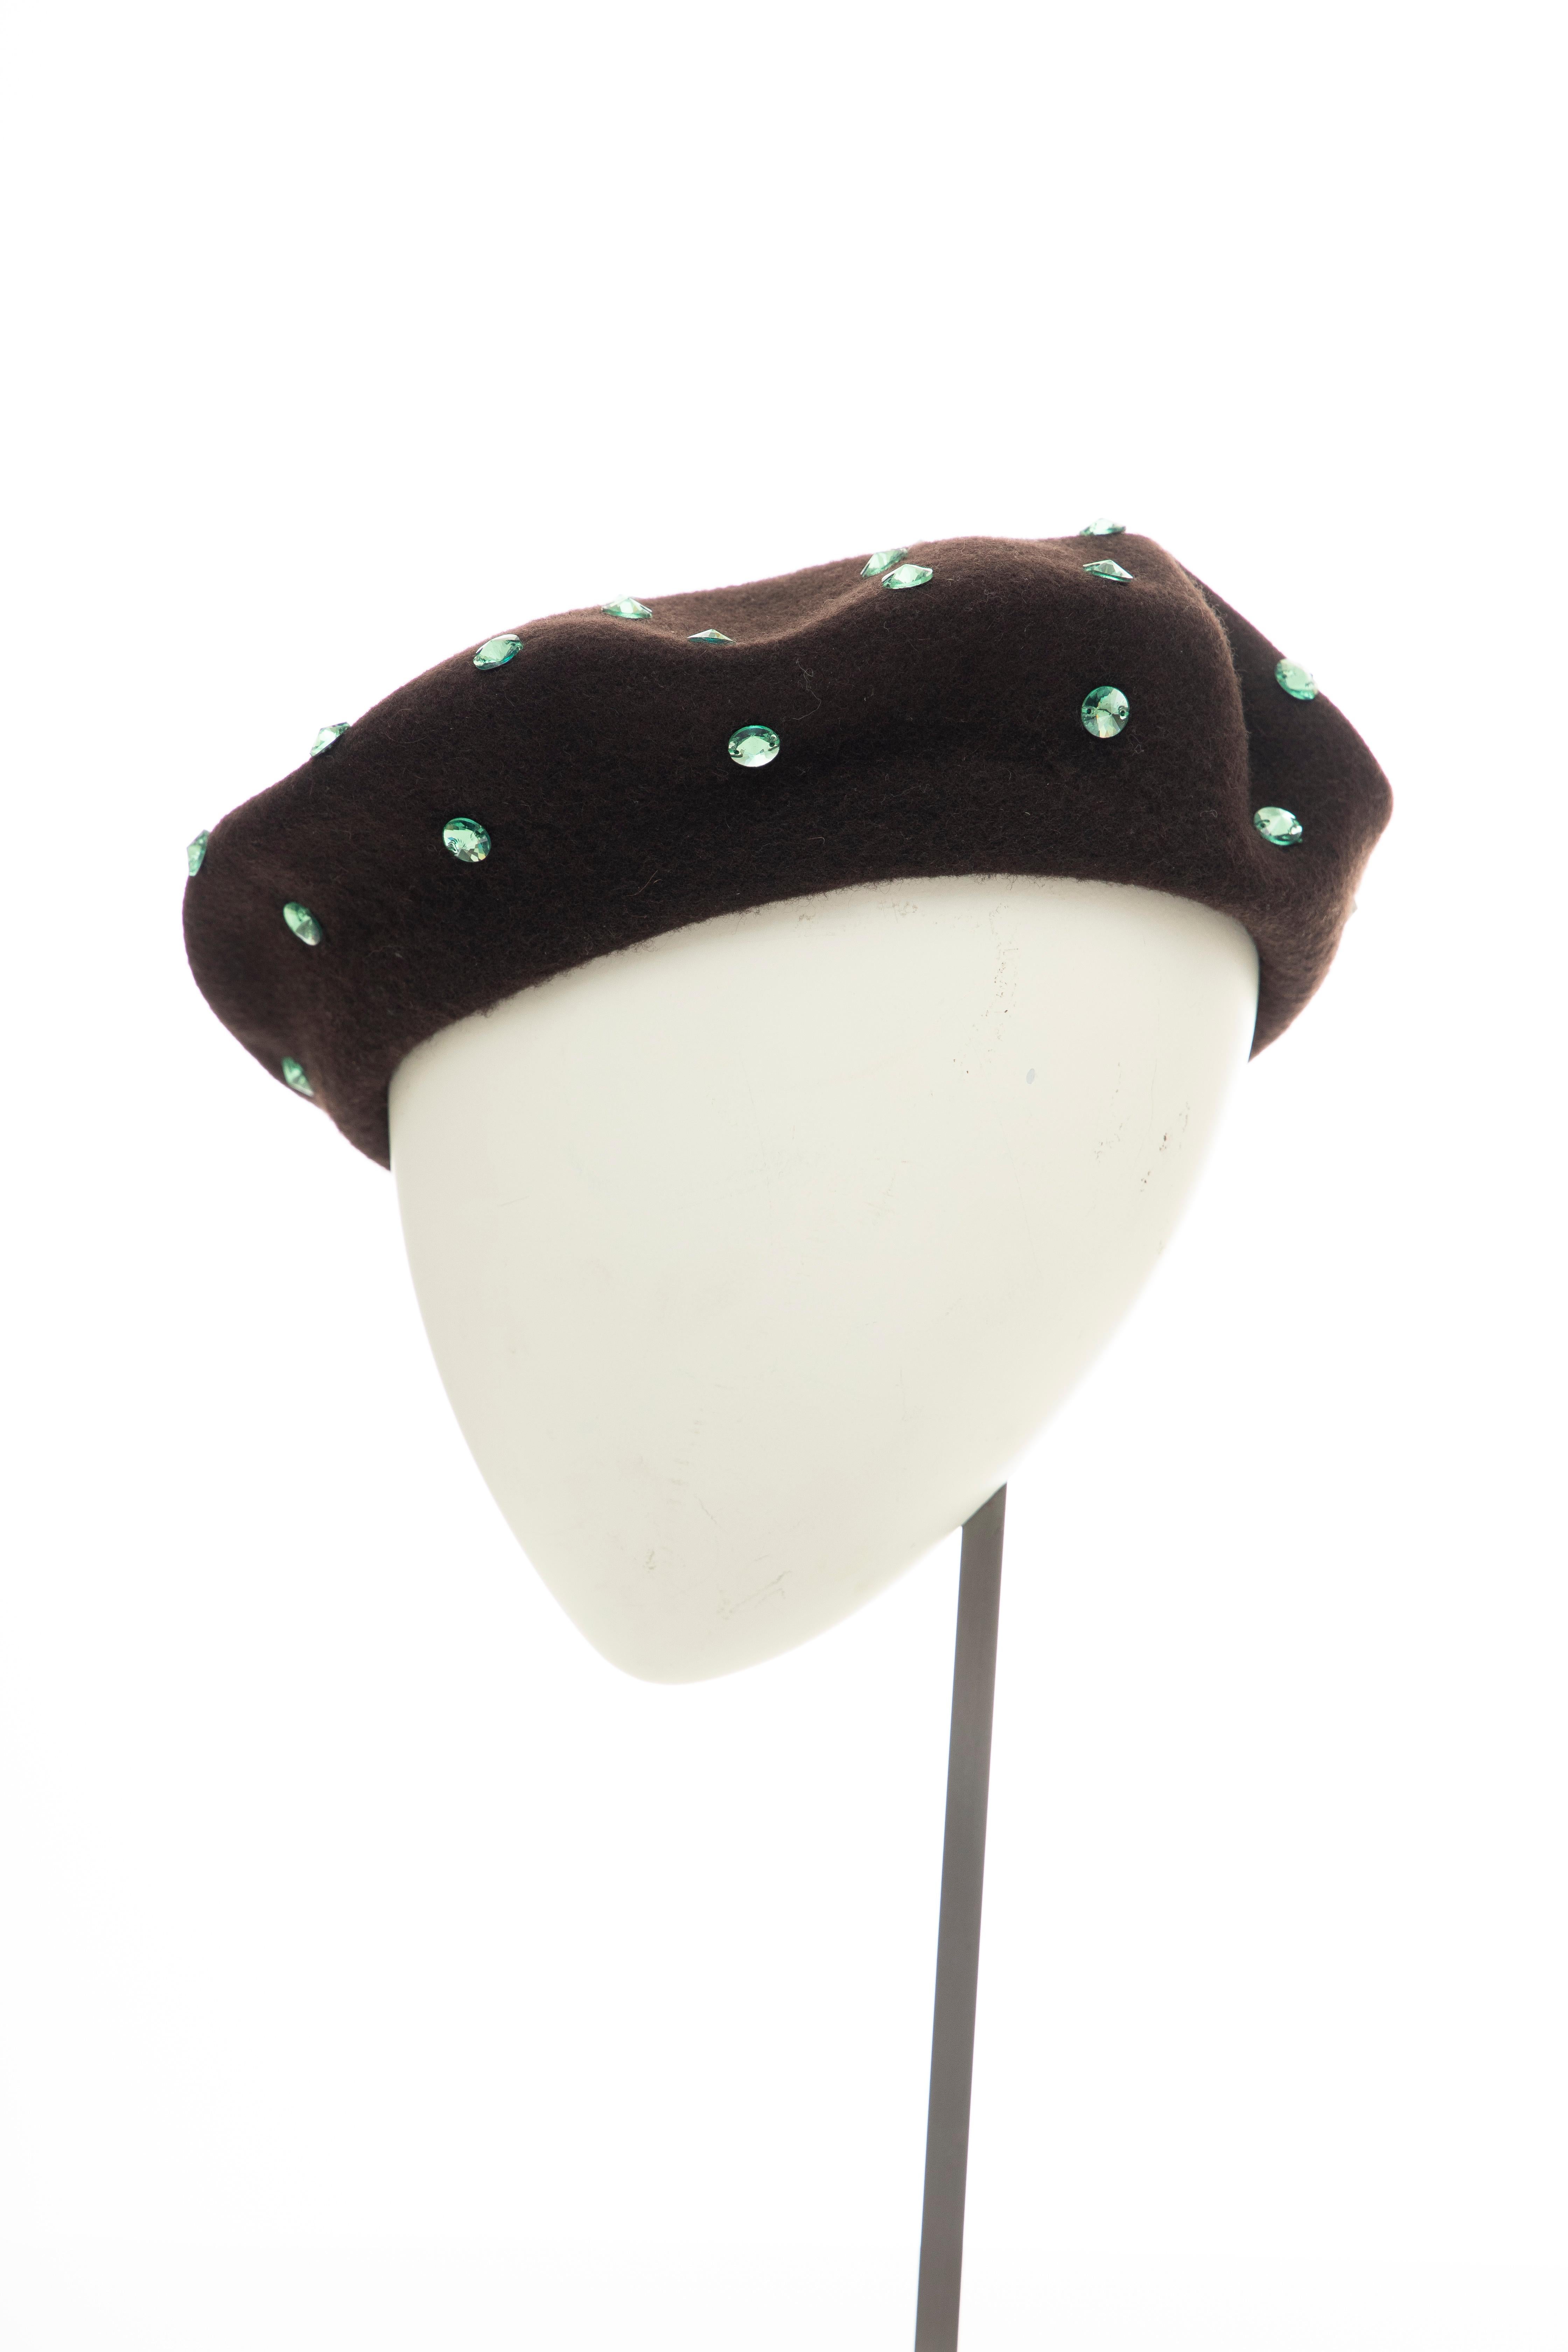 Dolce & Gabbana Wool Chocolate Brown Turquoise Cut Crystals Beret, Fall 2000 4